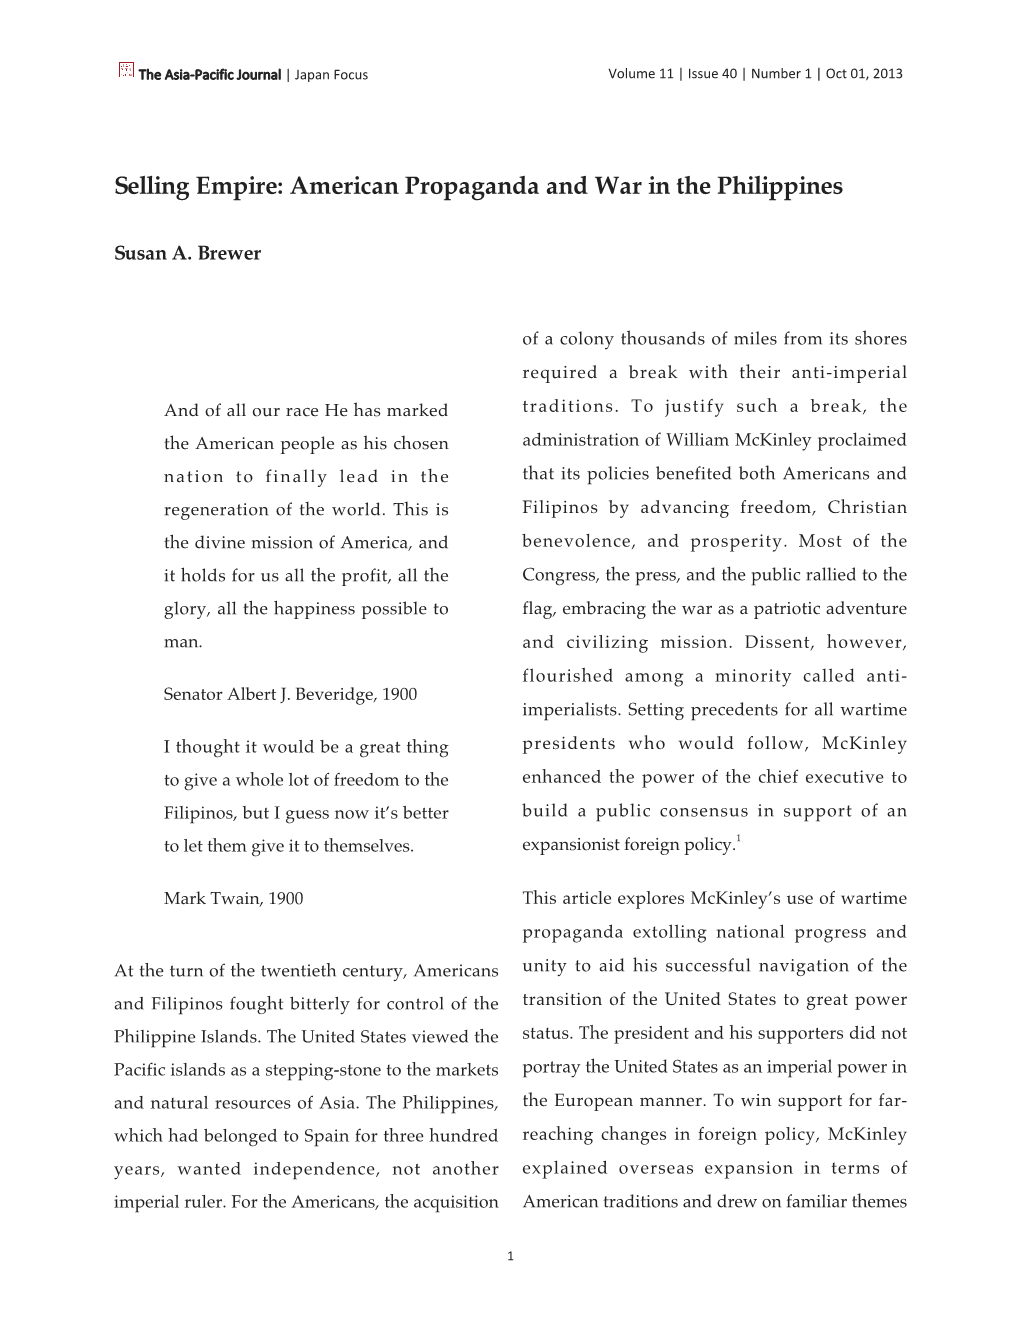 Selling Empire: American Propaganda and War in the Philippines